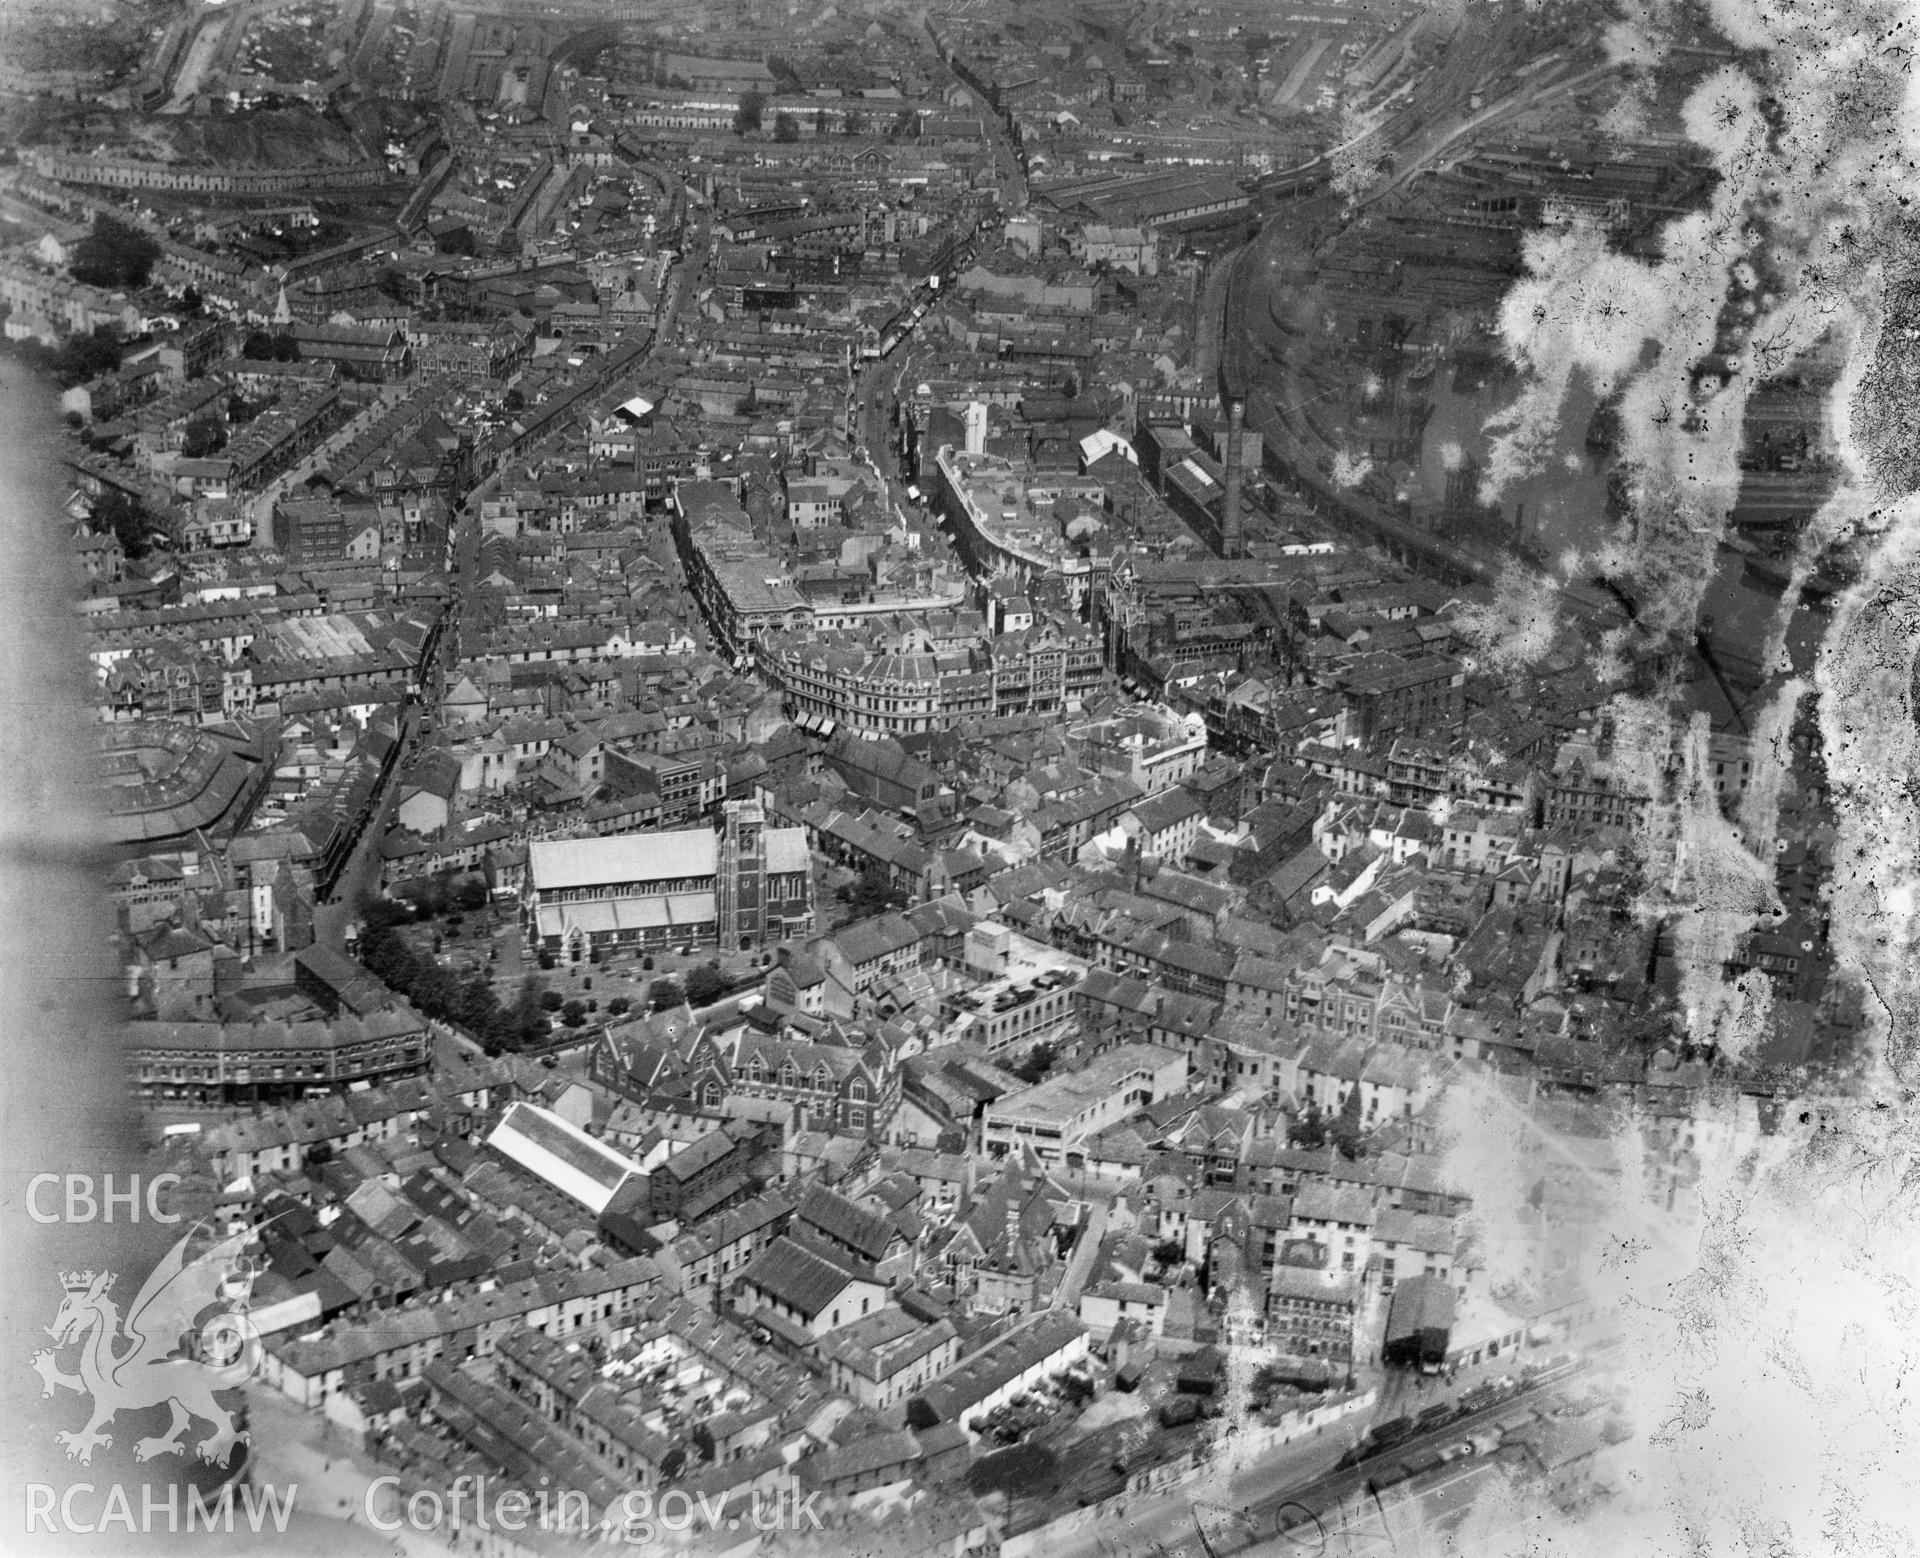 General view of Swansea showing St Mary's church, oblique aerial view. 5?x4? black and white glass plate negative.